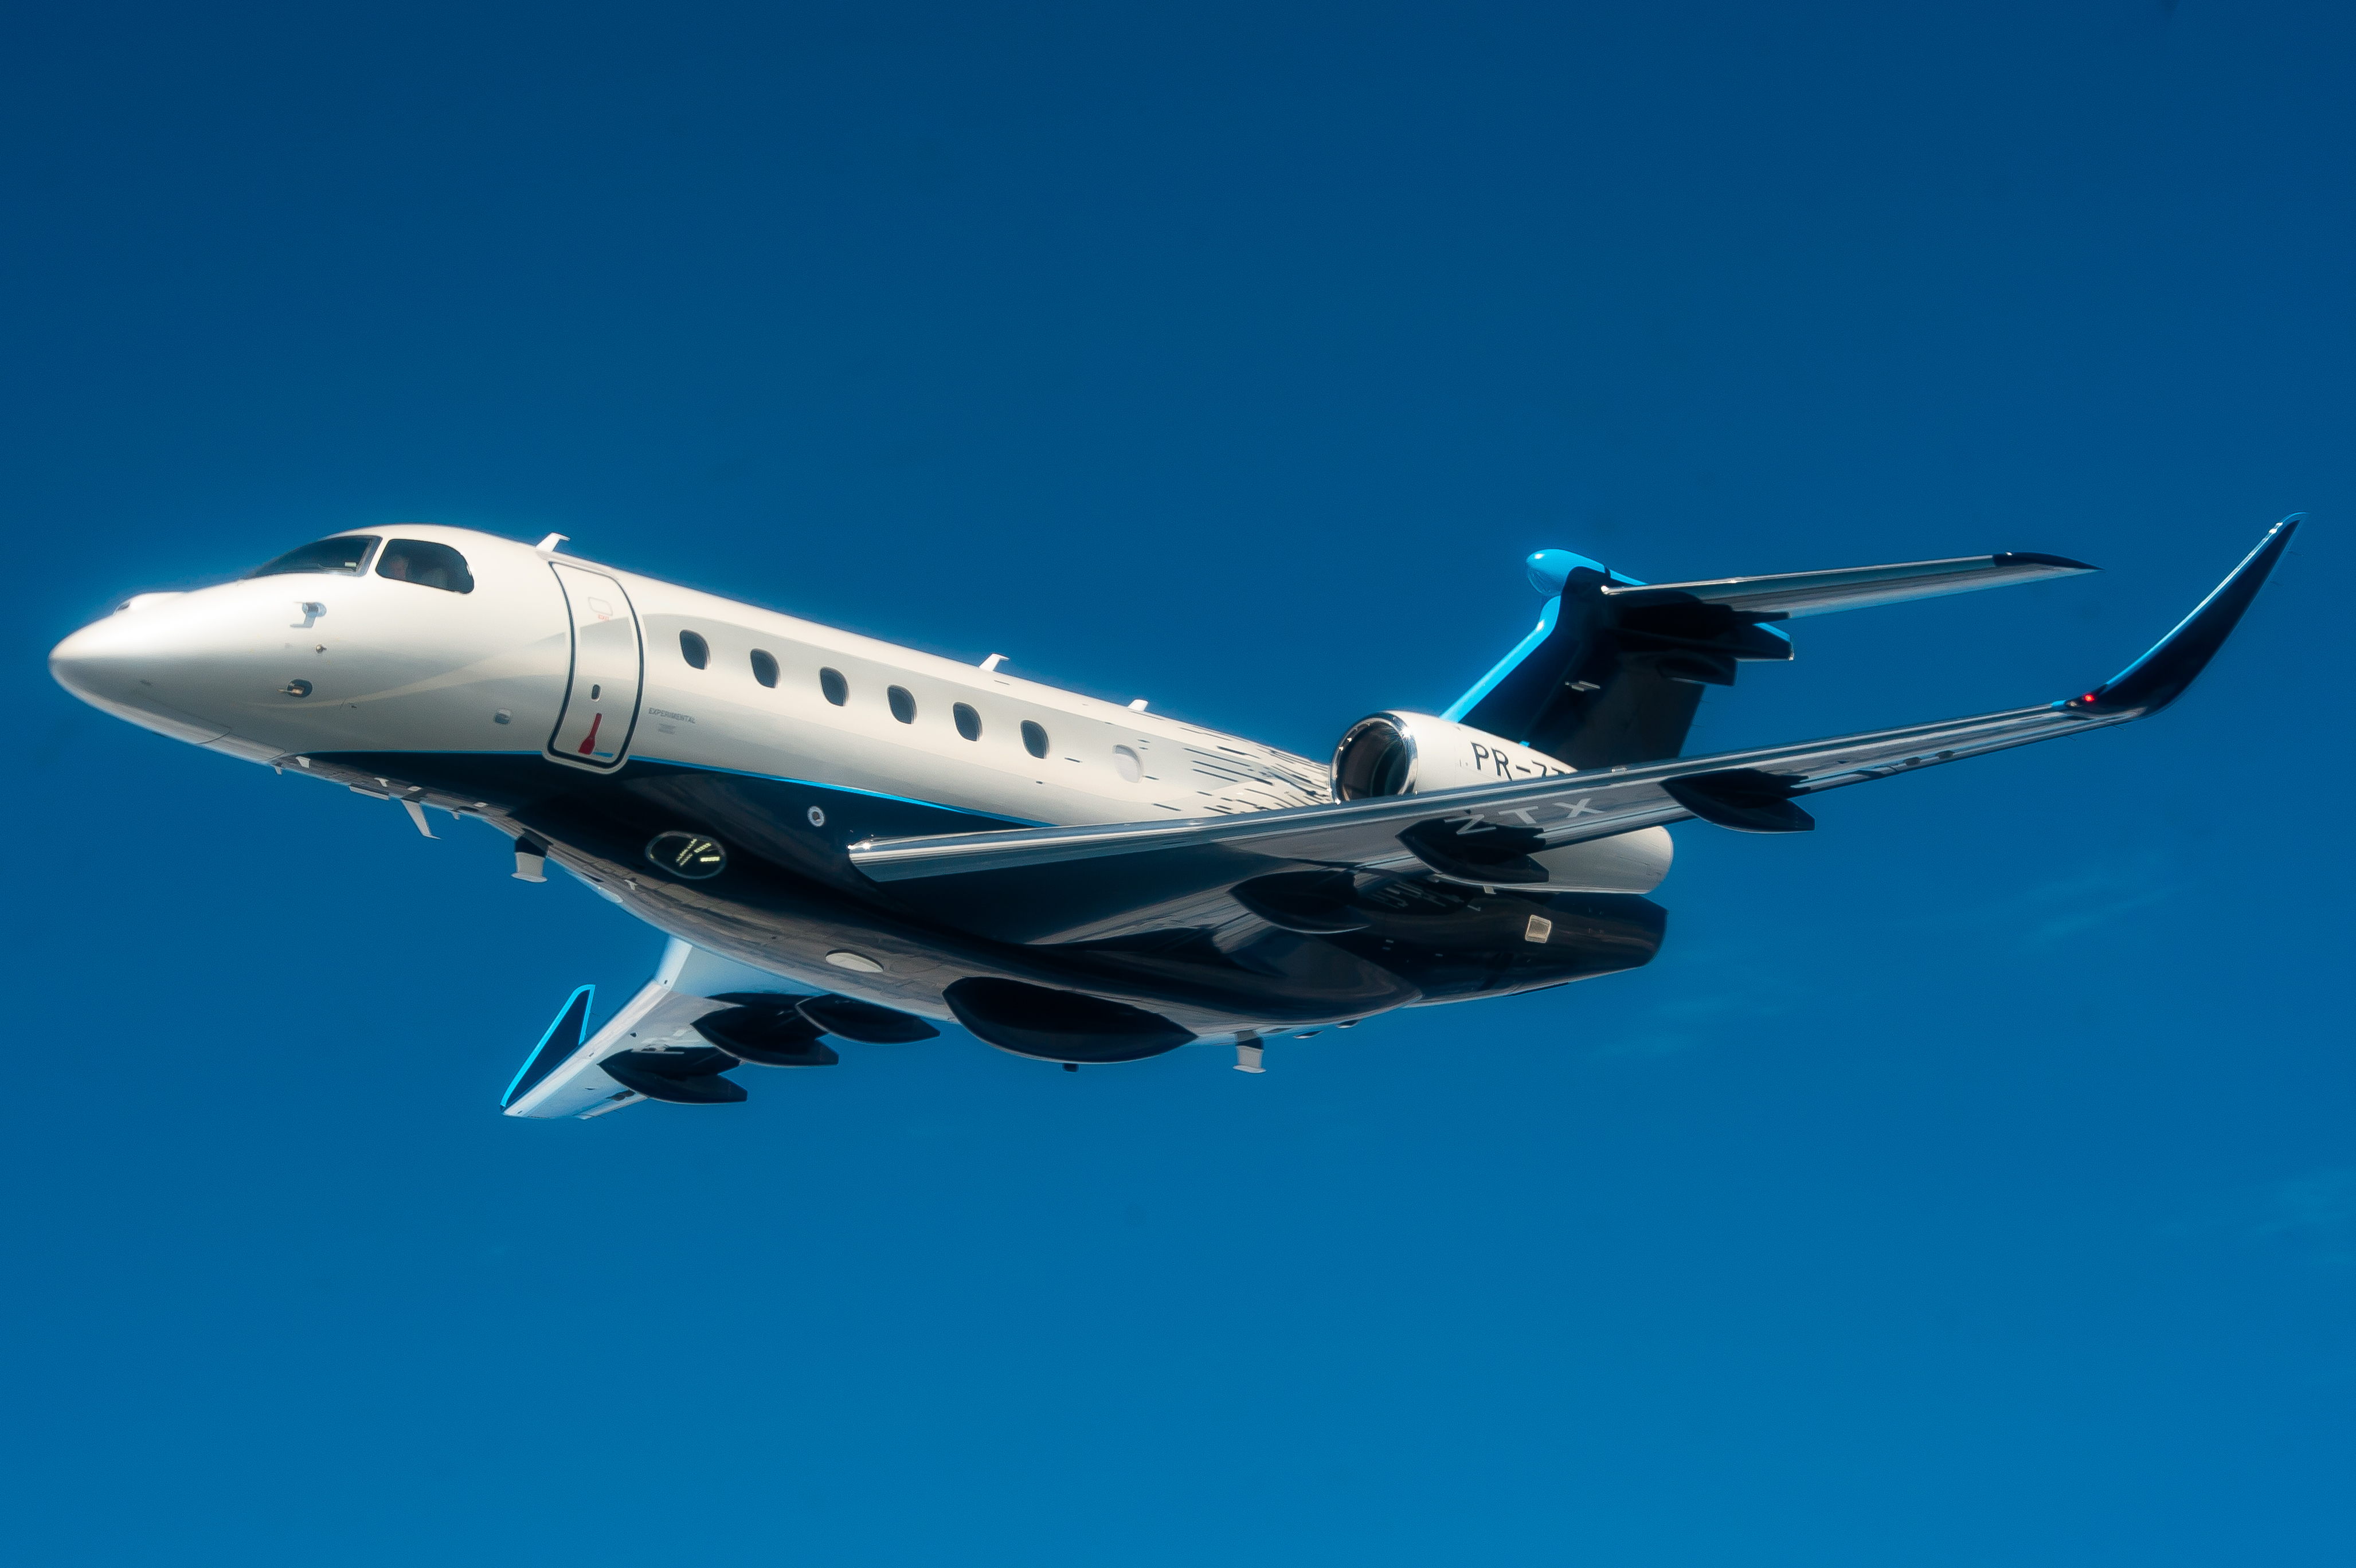 Embraer Praetor 600 Now Triple-Certified, Receiving EASA and FAA Approval, Becoming The Most Disruptive and Technologically Advanced Aircraft to Enter the Super-Midsize Category | The JetAv Blog